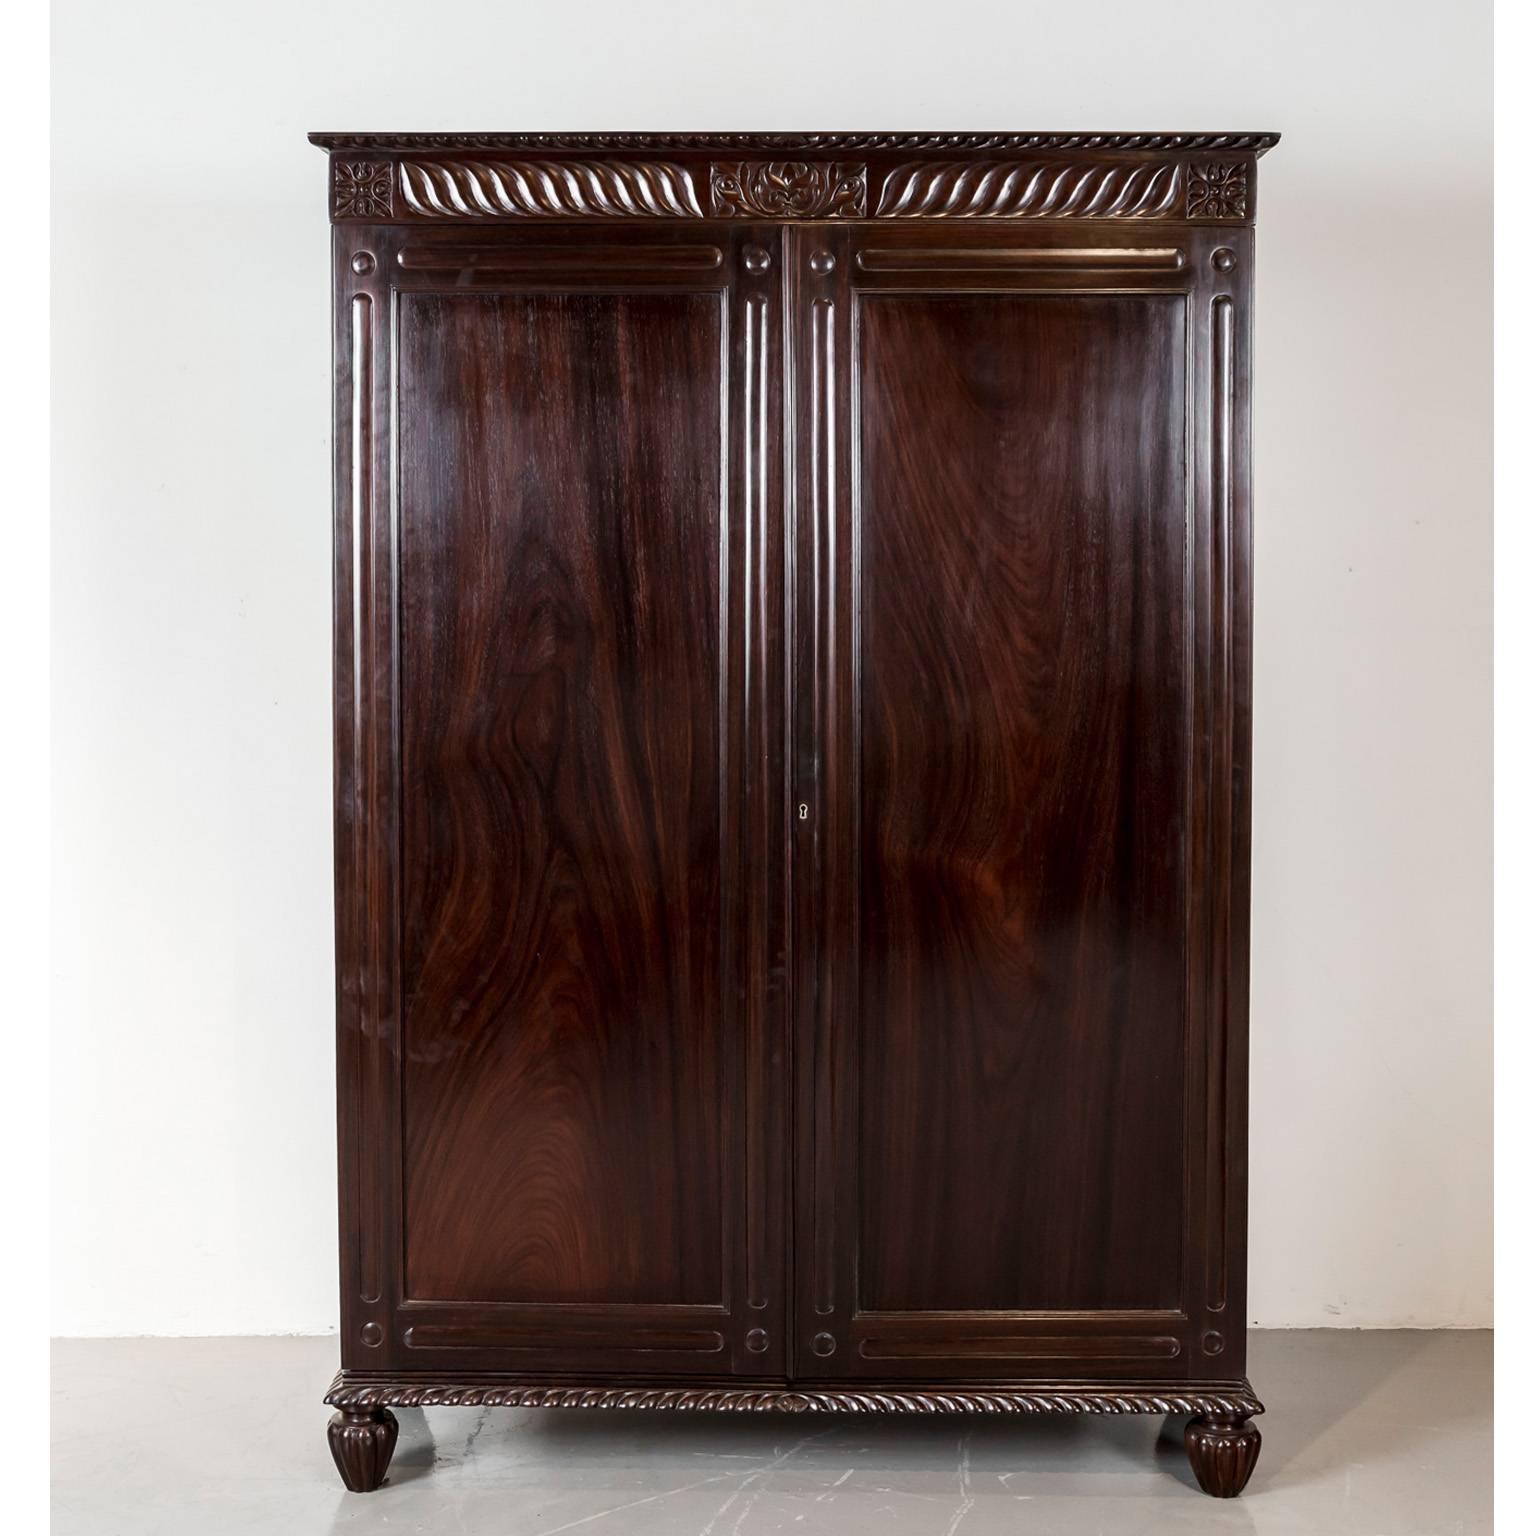 A British colonial cupboard in rosewood with a flat top, egg and dart carving on the edge and wave carving on the frieze centered by a floral block. 
The frames of the double doors are carved with elongated reserves and circles in the corners, the